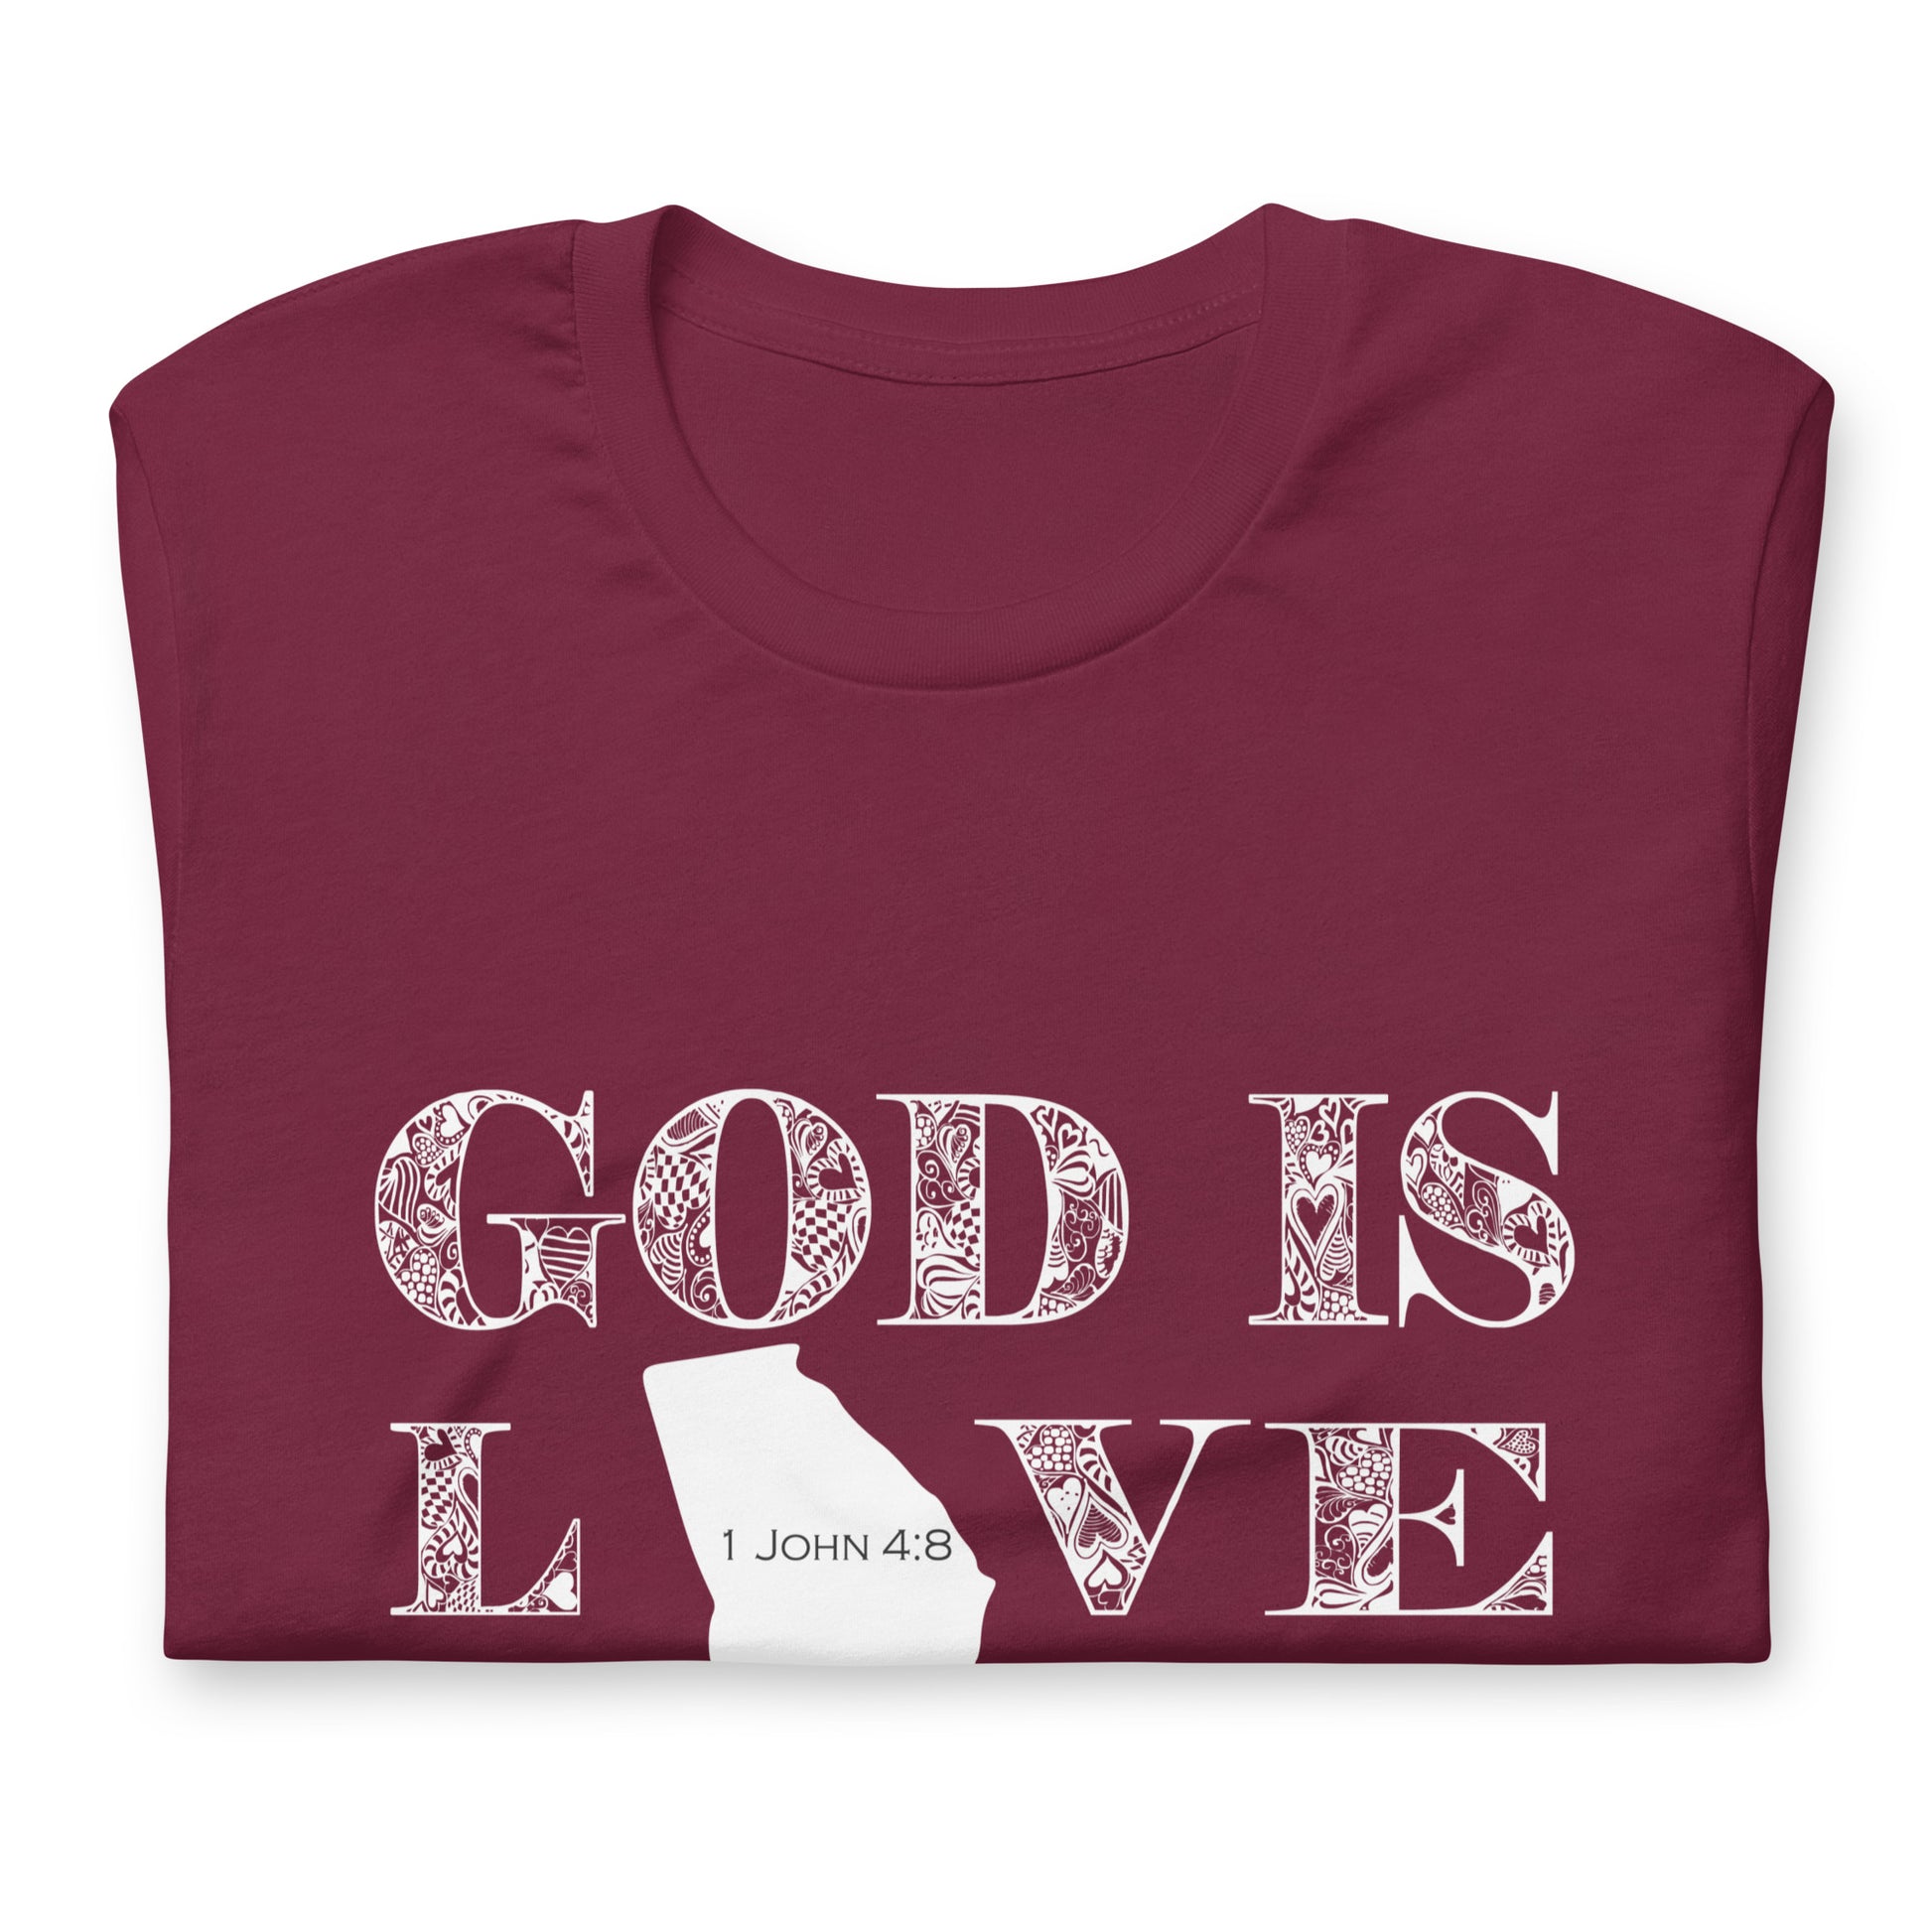 1 John 4:8 God is love Georgia T-shirt in Maroon - folded front view